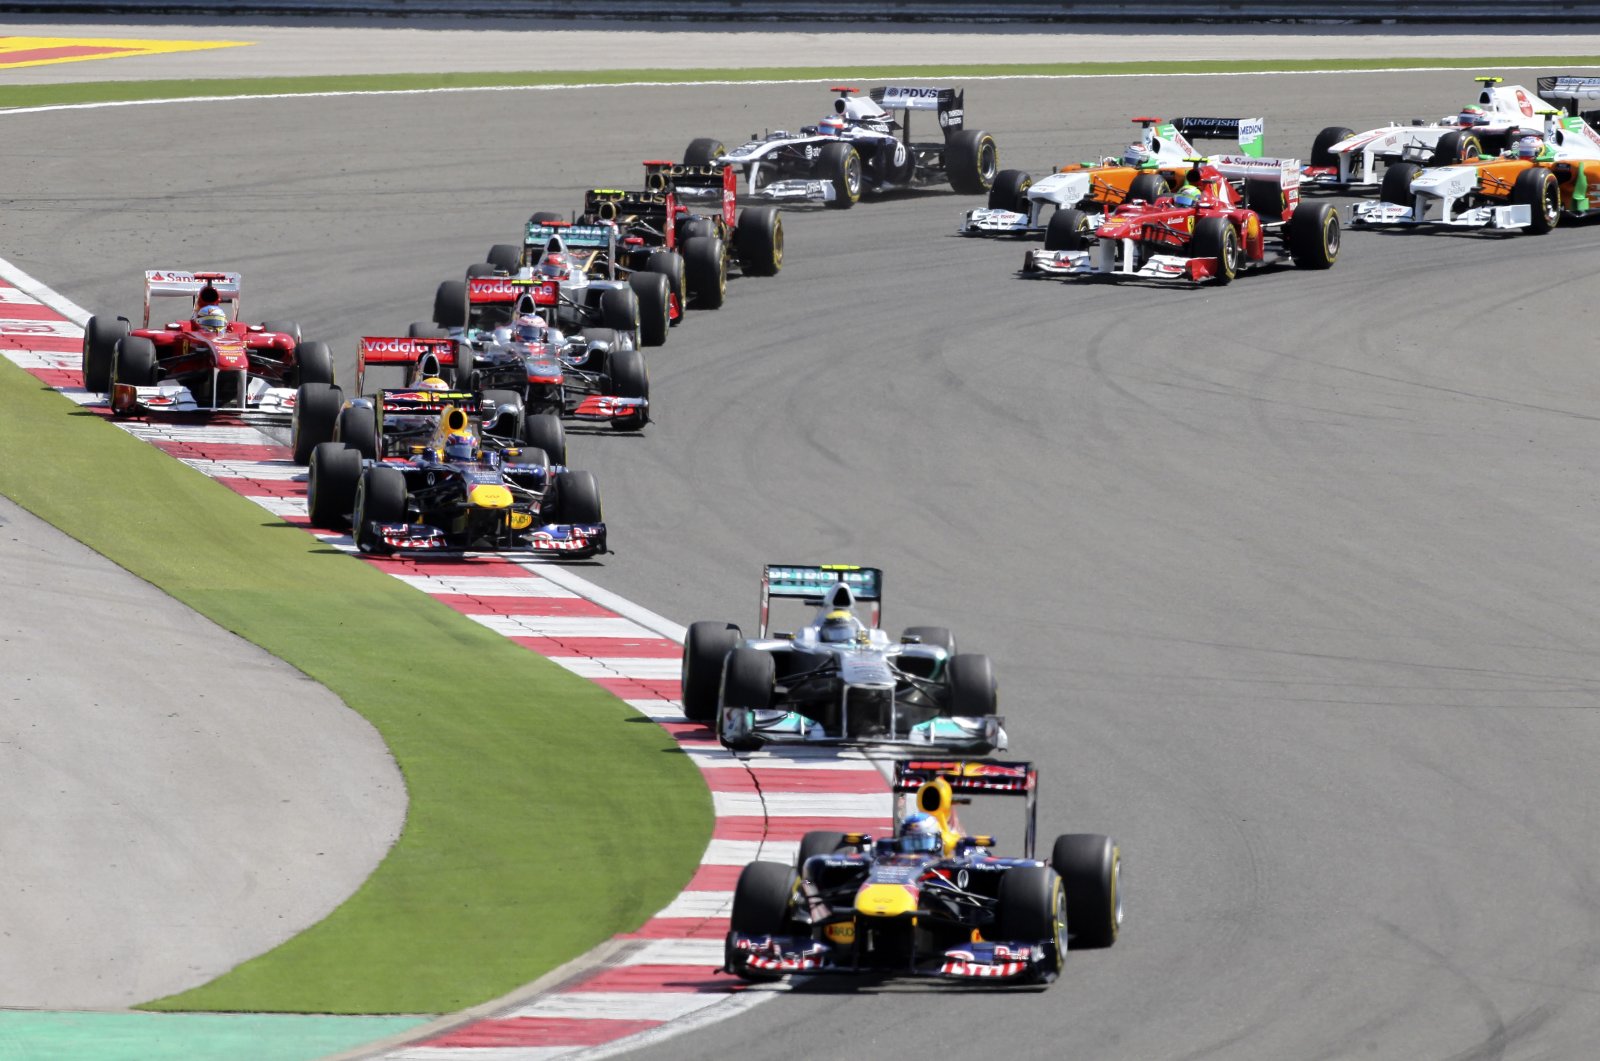 Red Bull driver Sebastian Vettel leads the field after the start of the Formula One race at the Istanbul Park circuit racetrack in Istanbul, Turkey, May 8, 2011. (AP Photo)